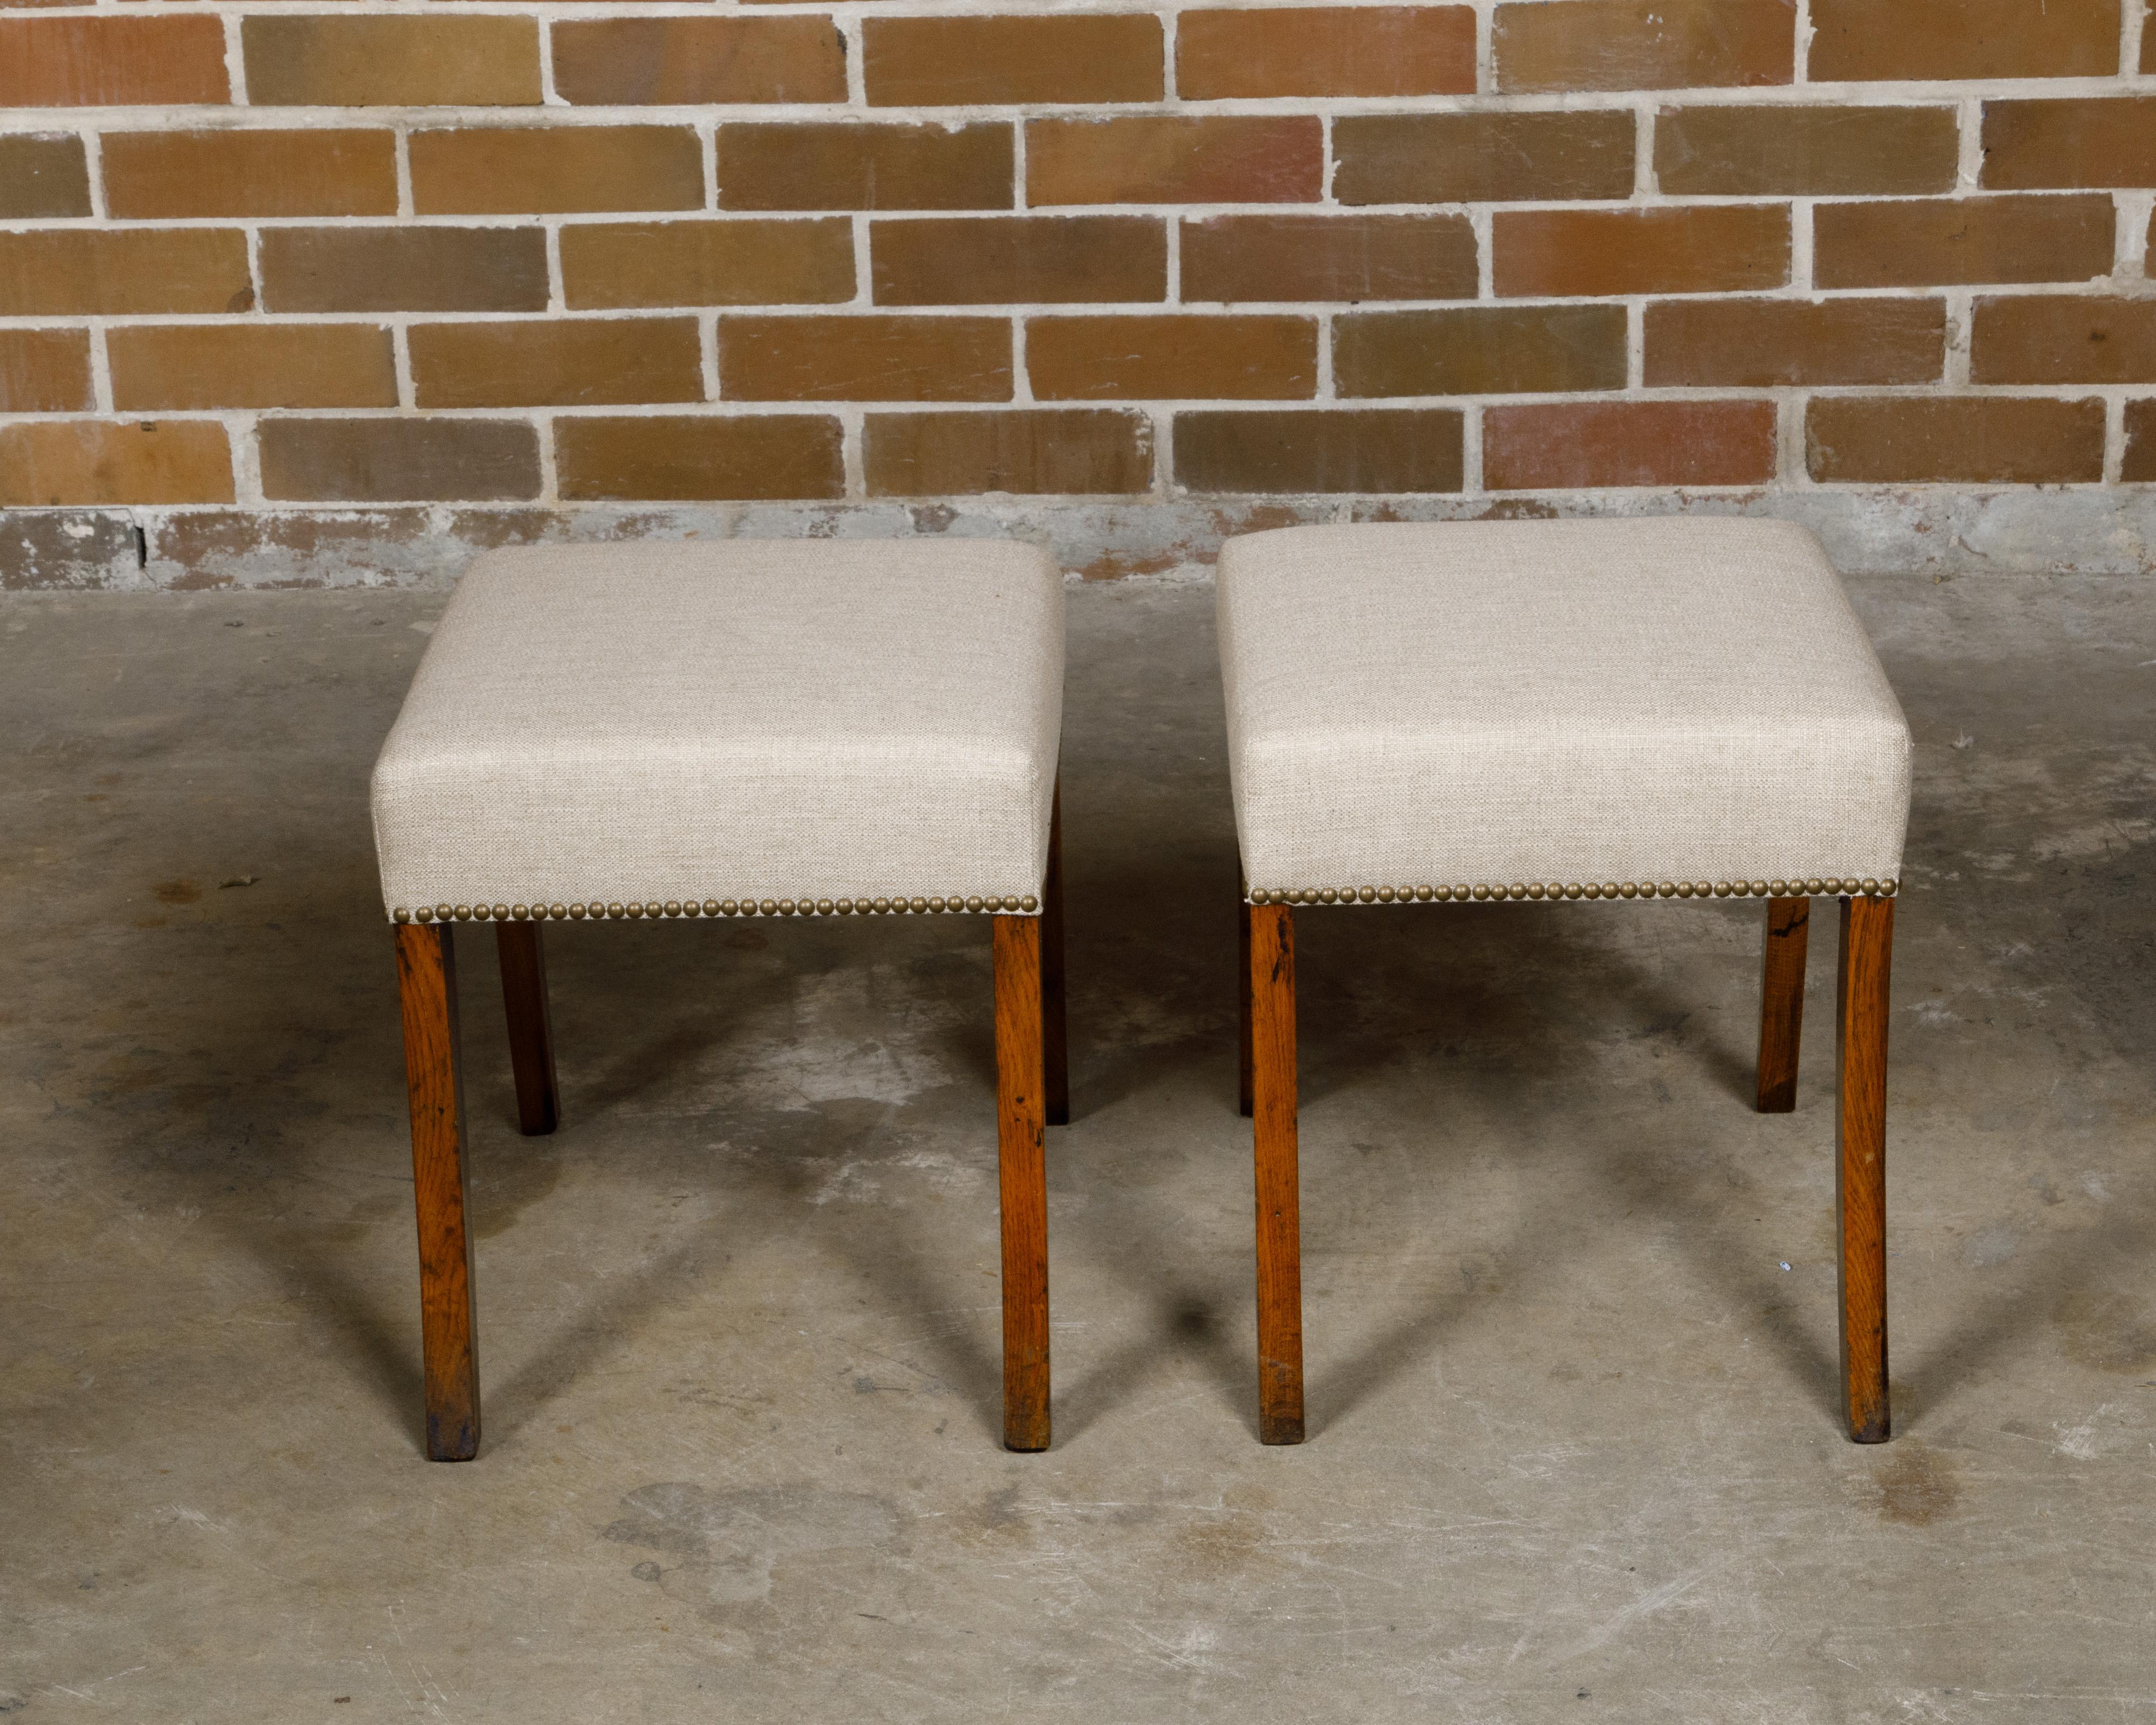 Pair of English 19th Century Oak Stools with Saber Legs and Custom Upholstery For Sale 4